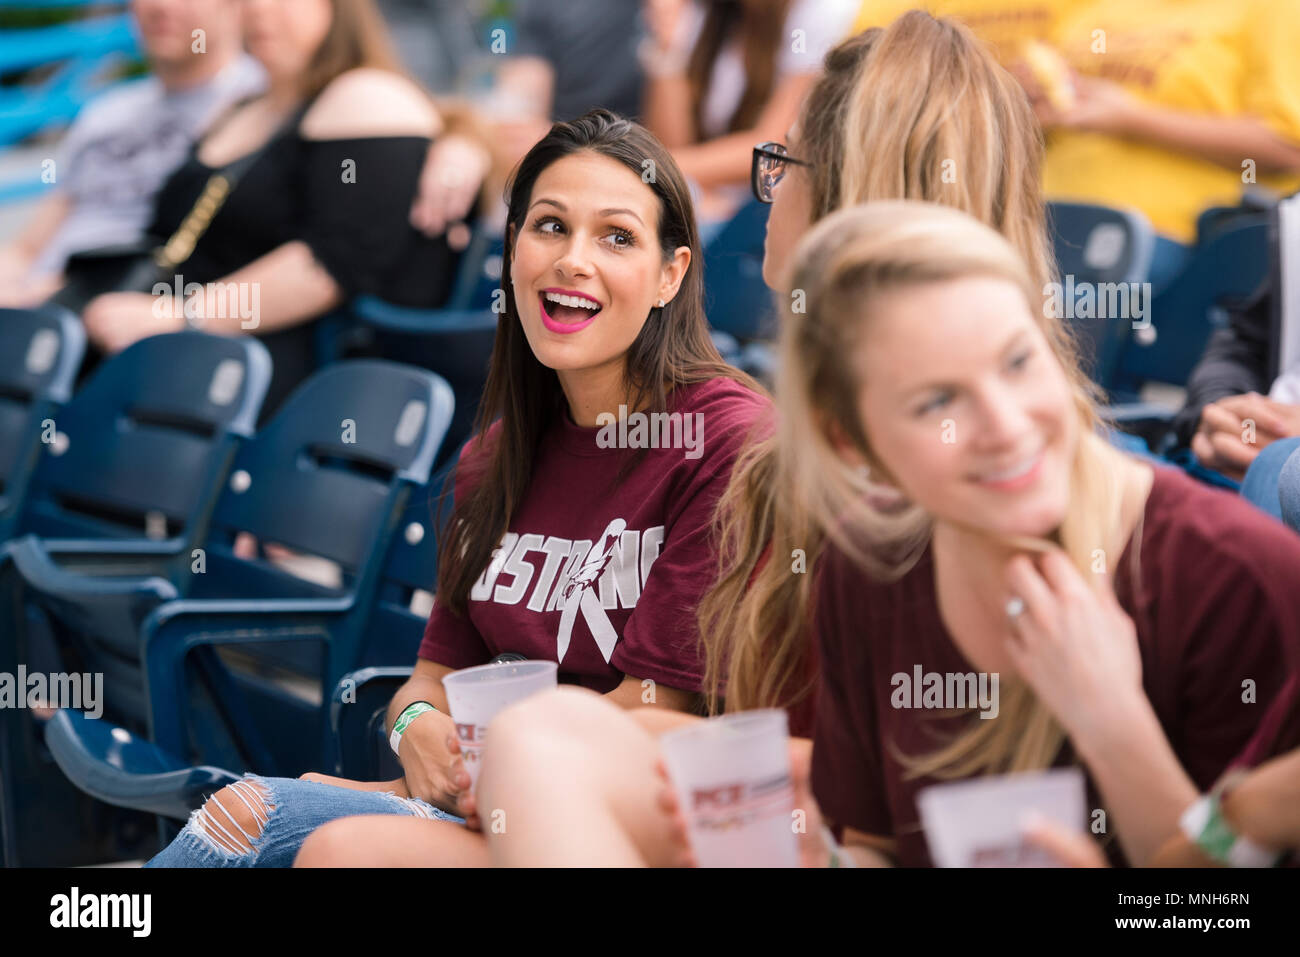 Pompano Beach, Florida, USA. 16th May, 2018. Young ladies seen enjoying the live performance during the Parkland Strong Benefit Concert.South Florida holds benefit concert to raise money for Marjory Stoneman Douglas victim families, and survivors. 3,000 people attended the soldout show, in support of their community. Credit: Emilee Mcgovern/SOPA Images/ZUMA Wire/Alamy Live News Stock Photo